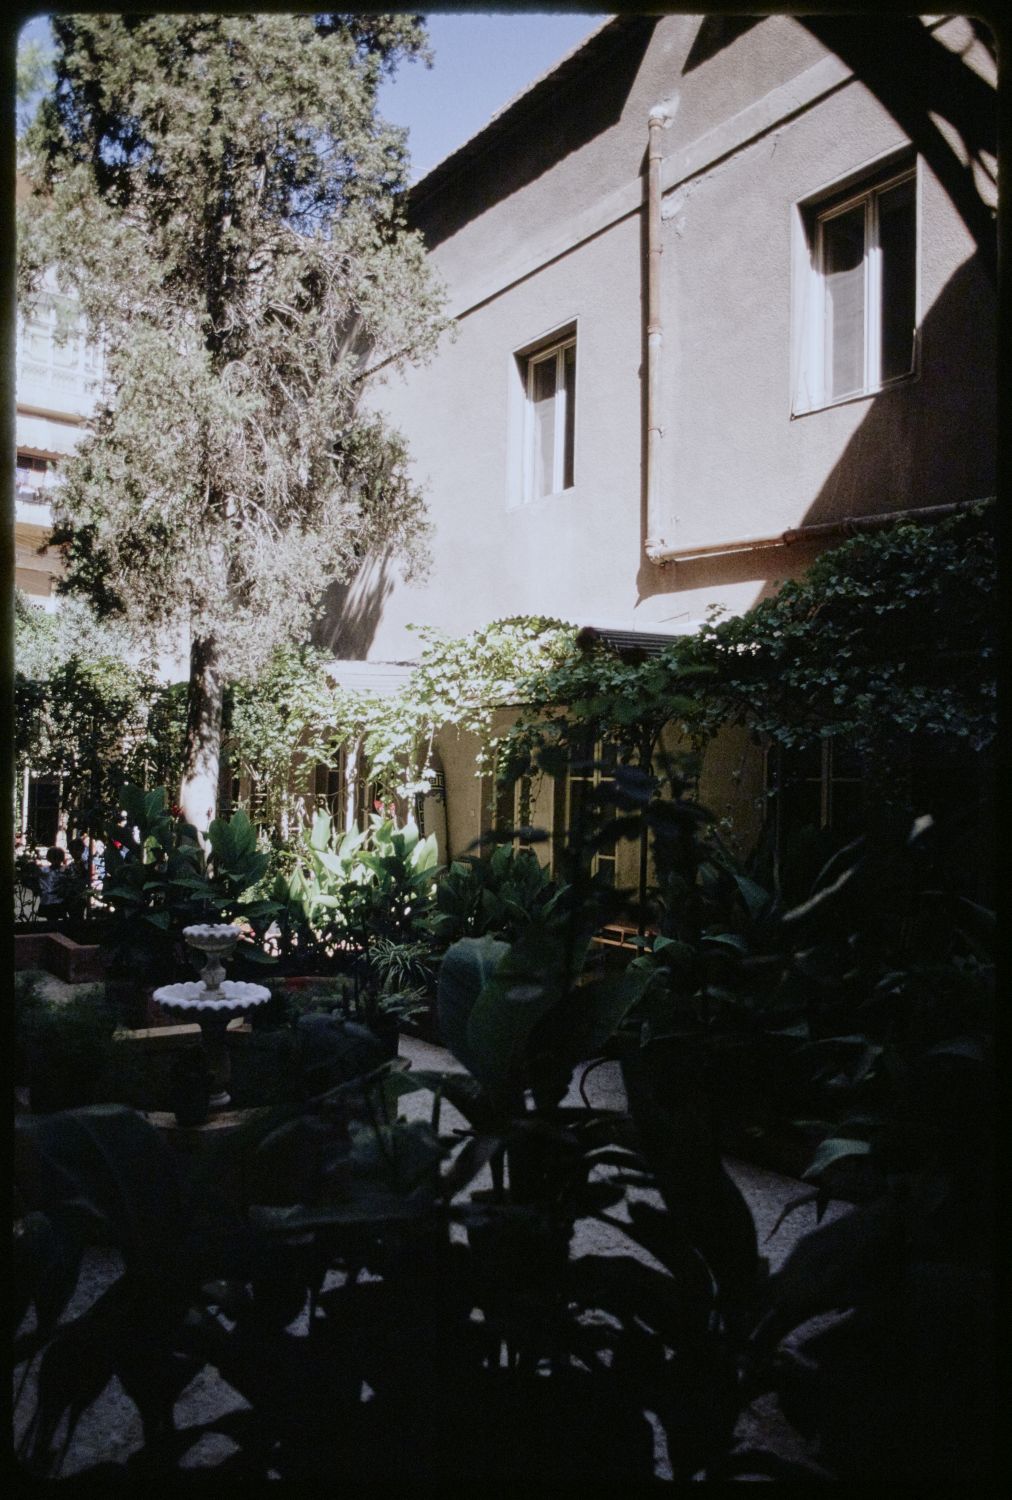 View of courtyard.